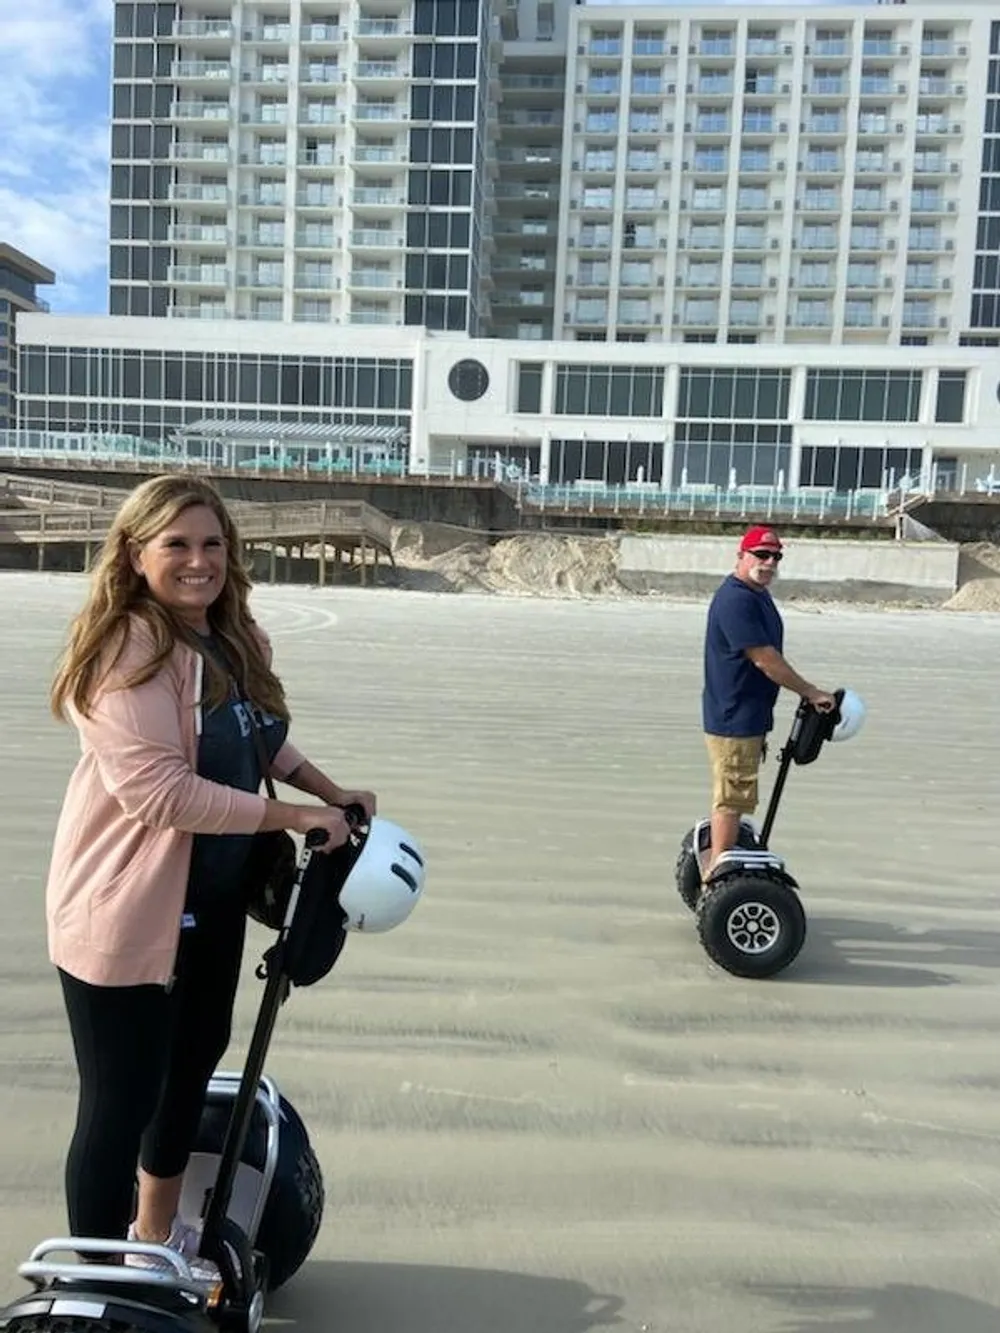 Two people are enjoying a ride on Segways along a sandy beach with a large hotel building in the background